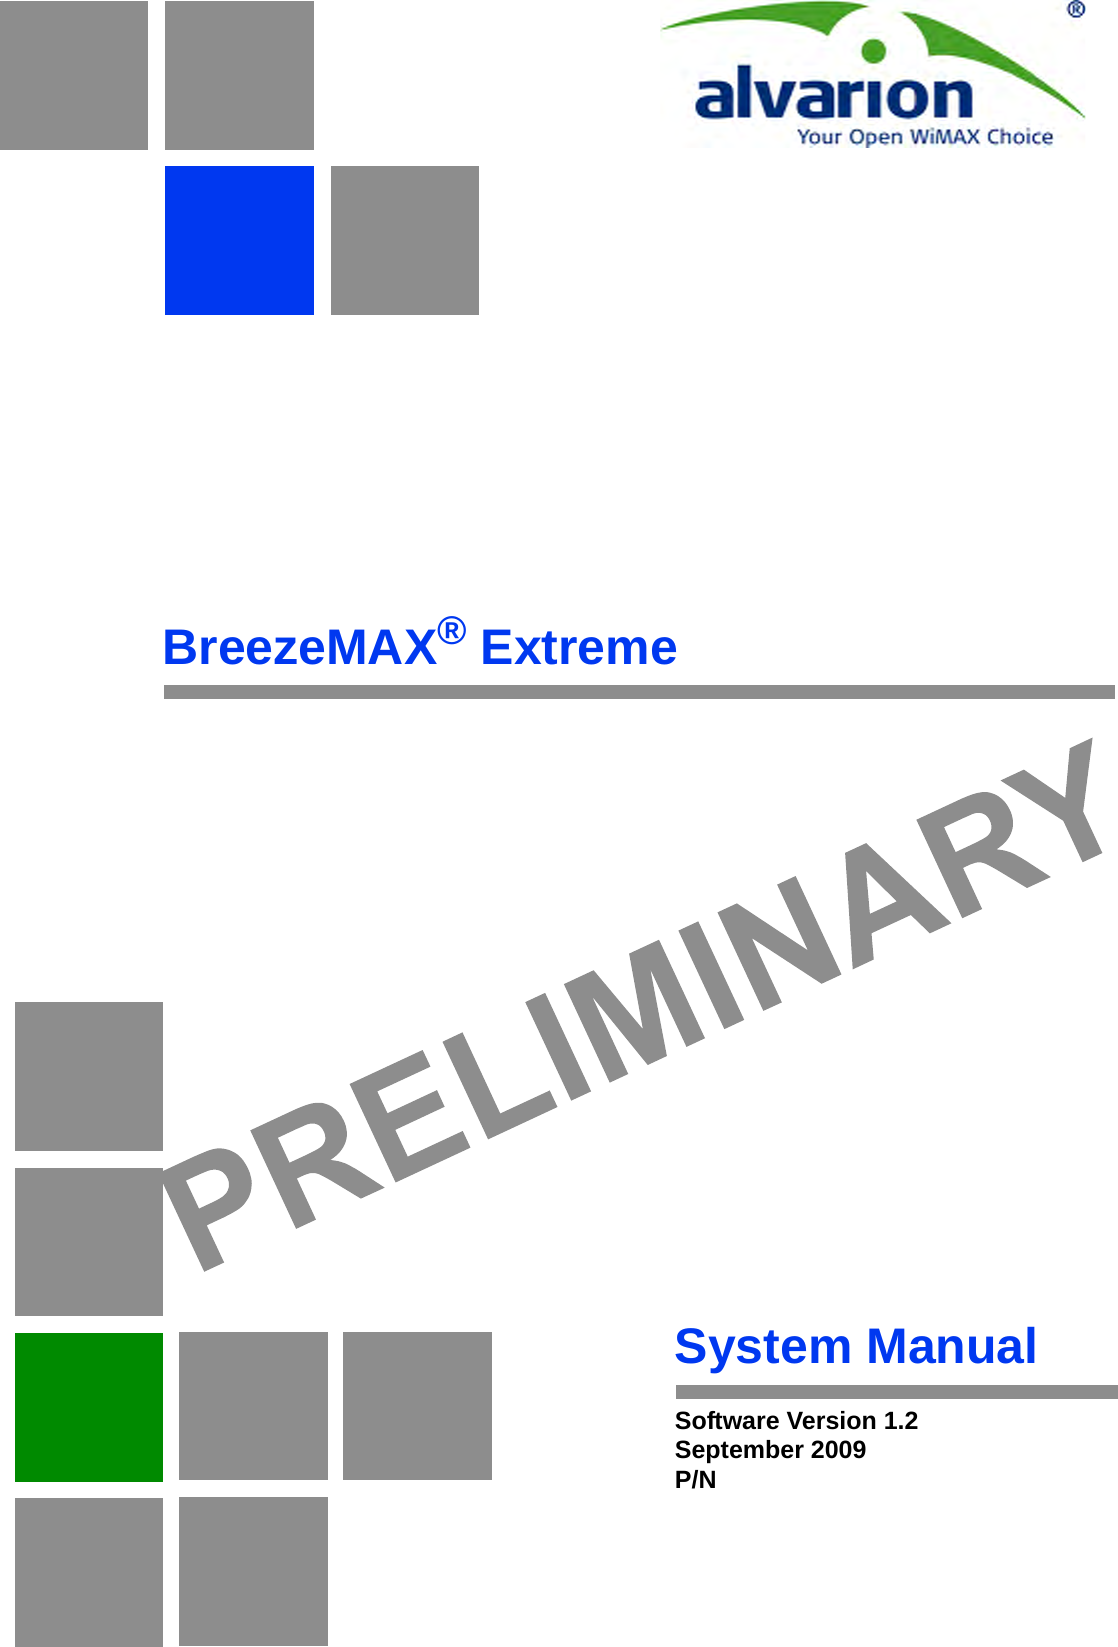 BreezeMAX® ExtremeSystem ManualSoftware Version 1.2September 2009P/N 